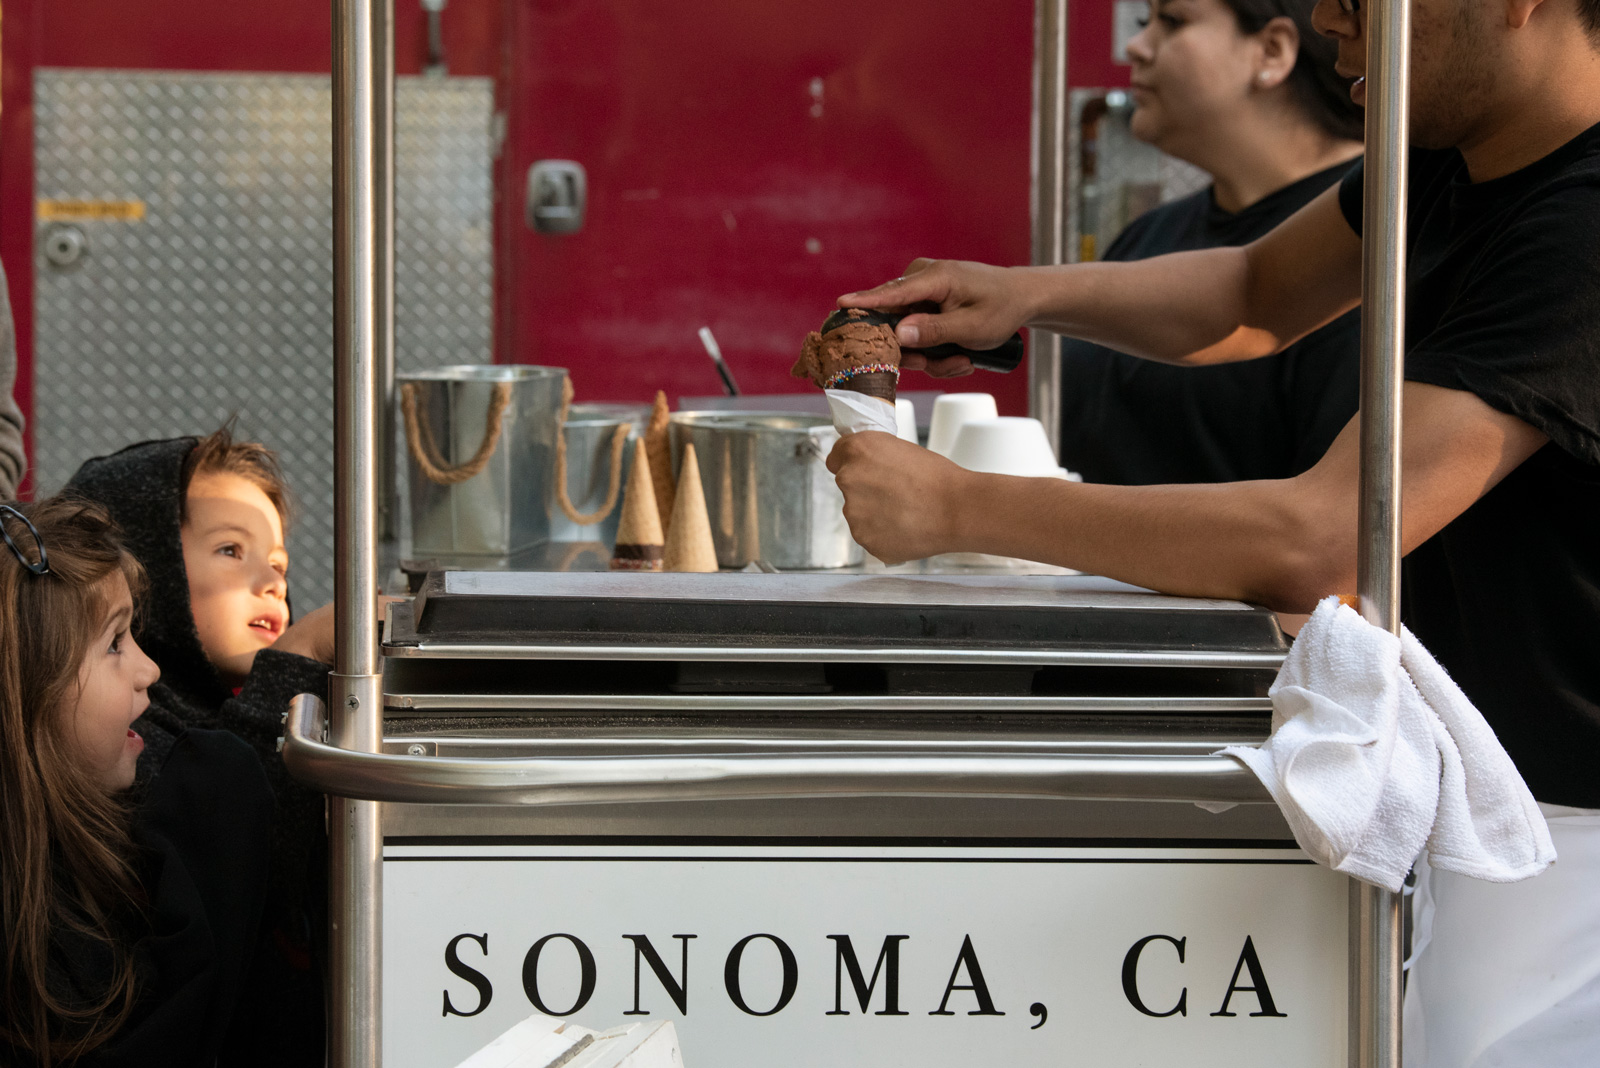 Children watching a worker scoop ice cream at a stall at the Sonoma market